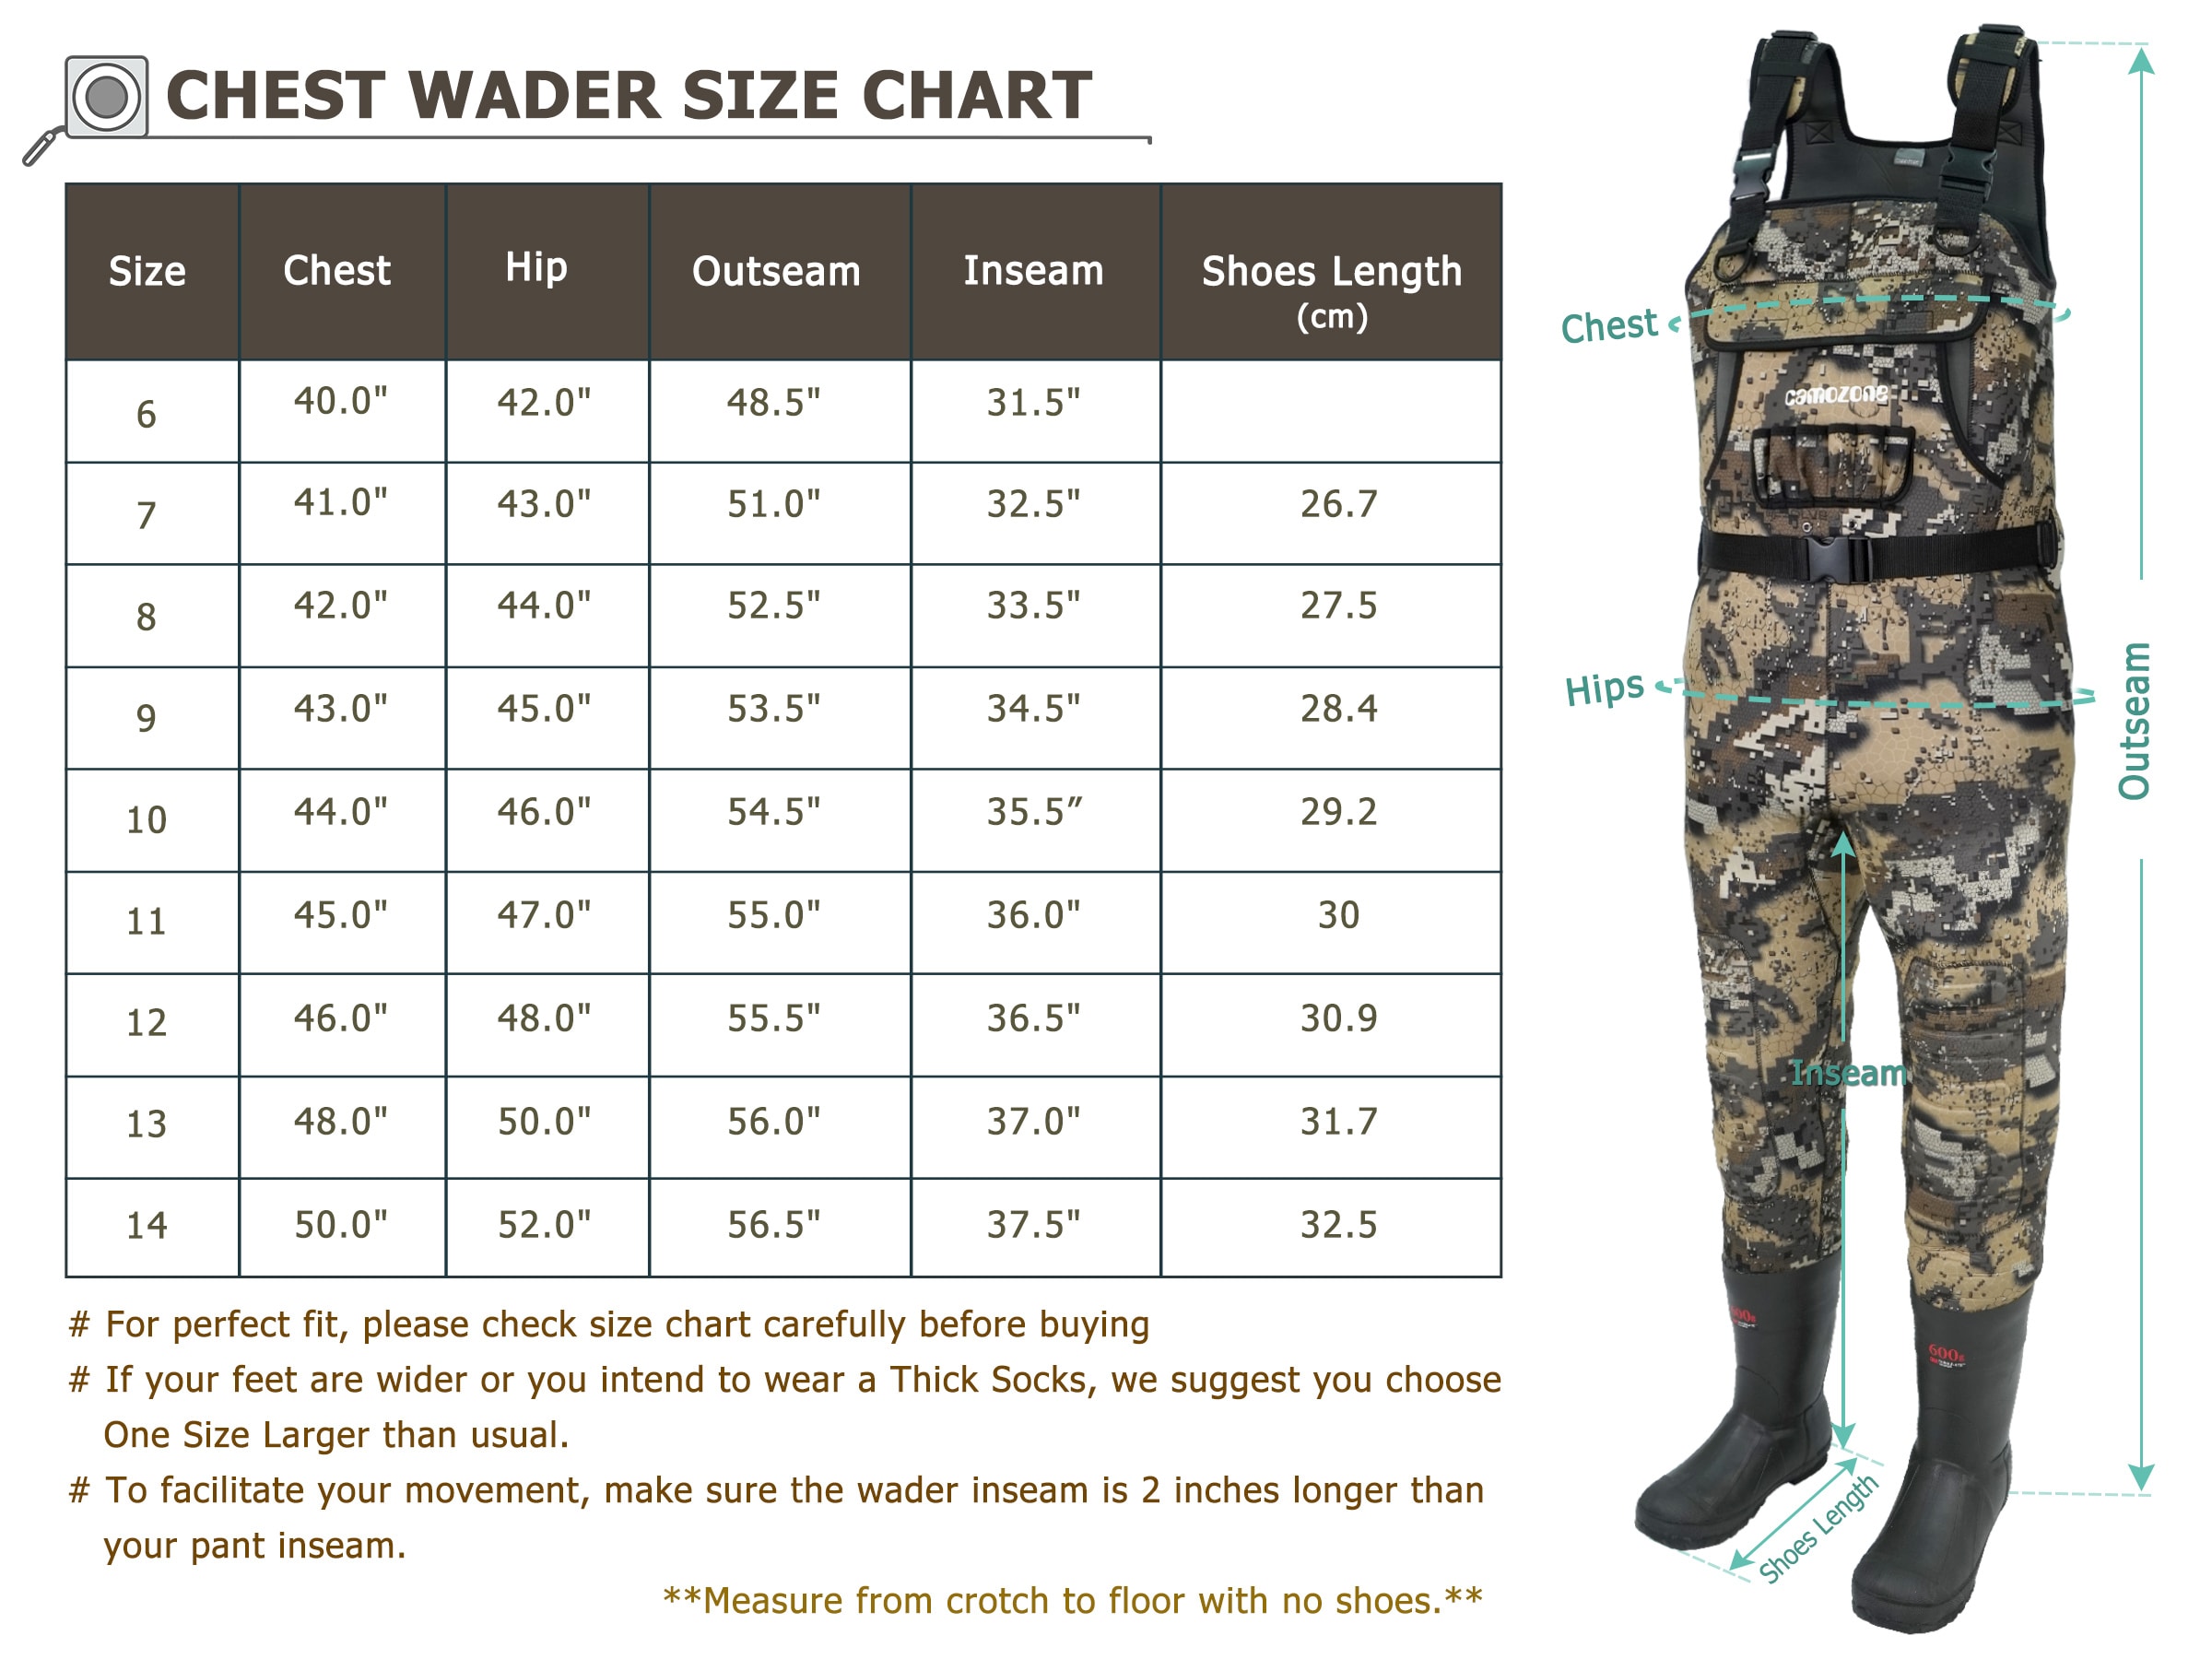 CAMOZONE Neoprene Chest Waders with Boots-size9 Unisex Fishing